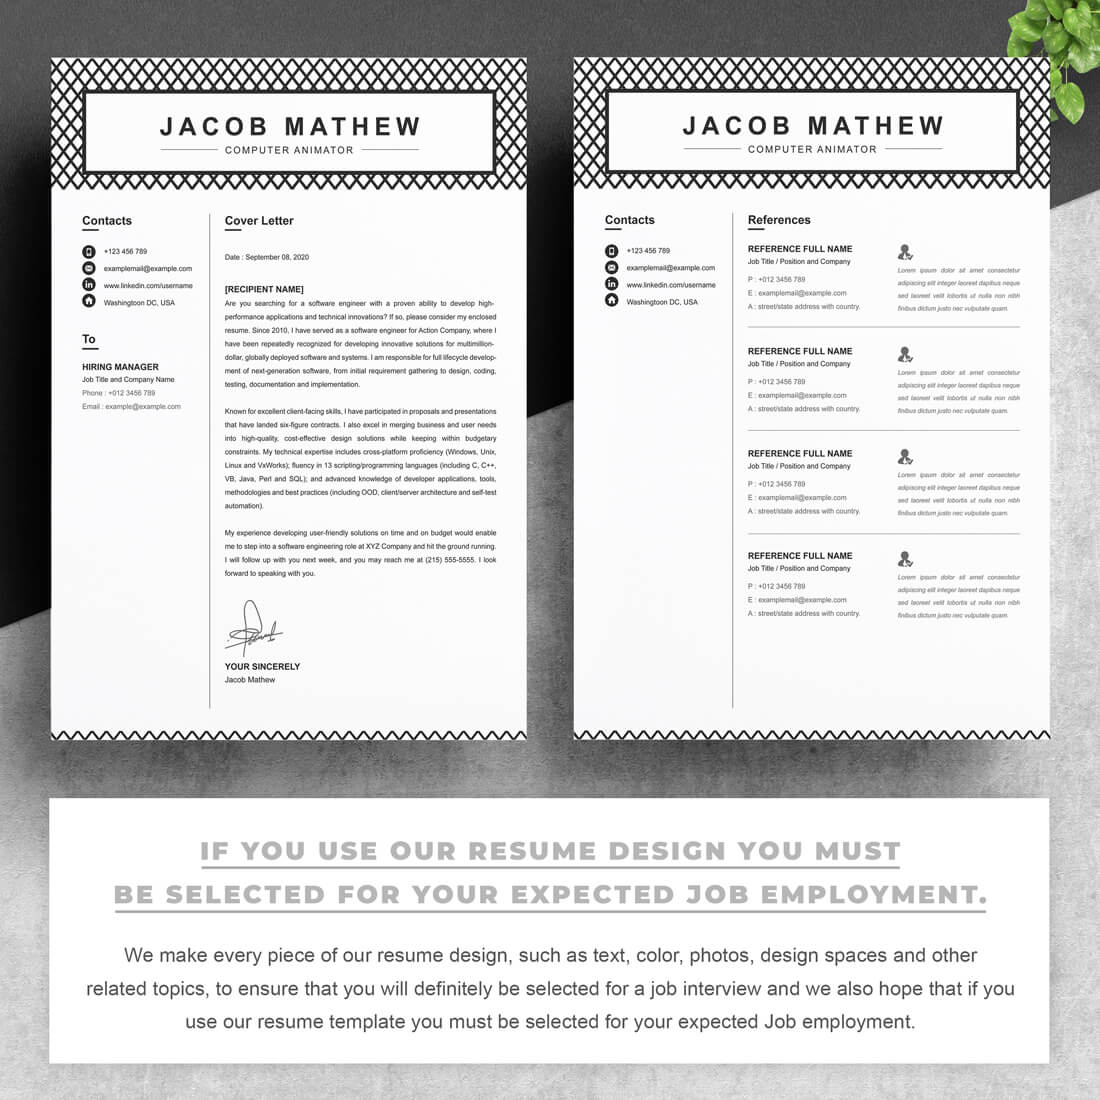 Two pages of the Creative Resume Template Design.